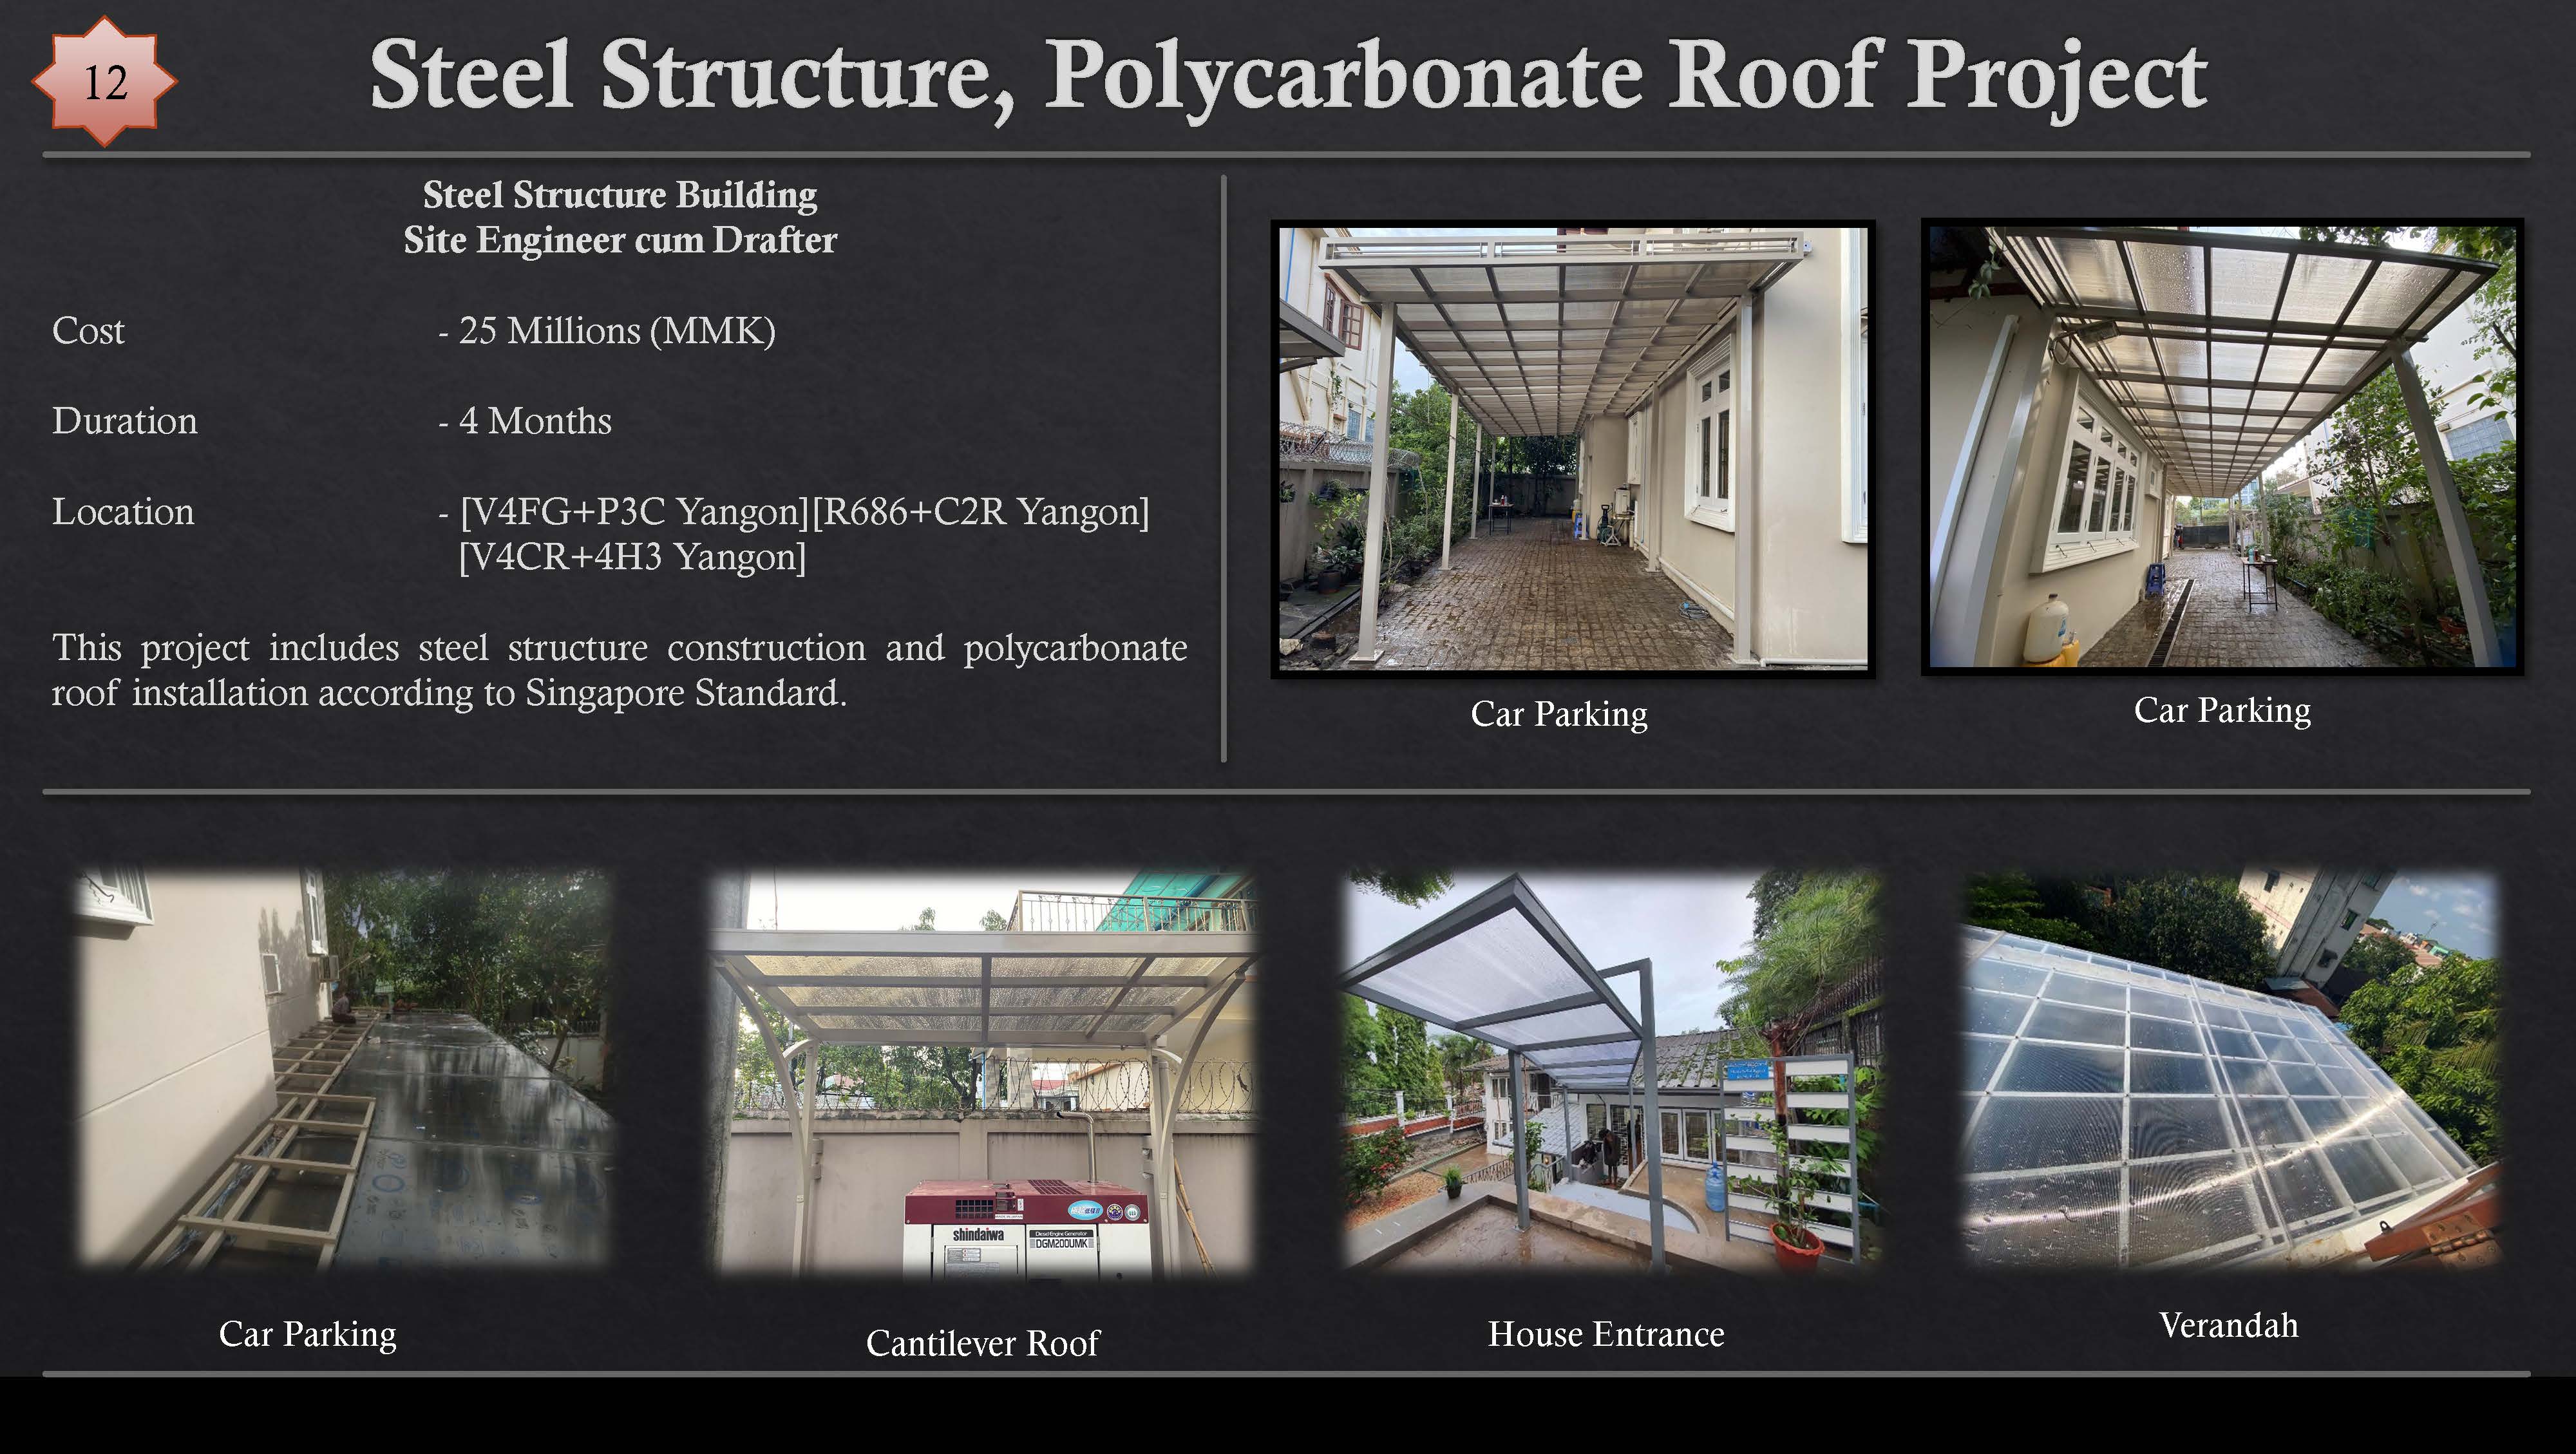 Steel Structure, Polycarbonate Roof Project

Steel Structure Building
Site Engineer cum Drafter

  
  
  
 
  
  
 
 

(Qo - 25 Millions (MMK)

Duration - 4 Months

Location - [VAFG+P3C Yangon][R686+C2R Yangon]
[VACR+4H3 Yangon]

This project includes steel structure construction and polycarbonate
roof installation according to Singapore Standard.

Car ZION Cantilever Roof House Entrance Verandah